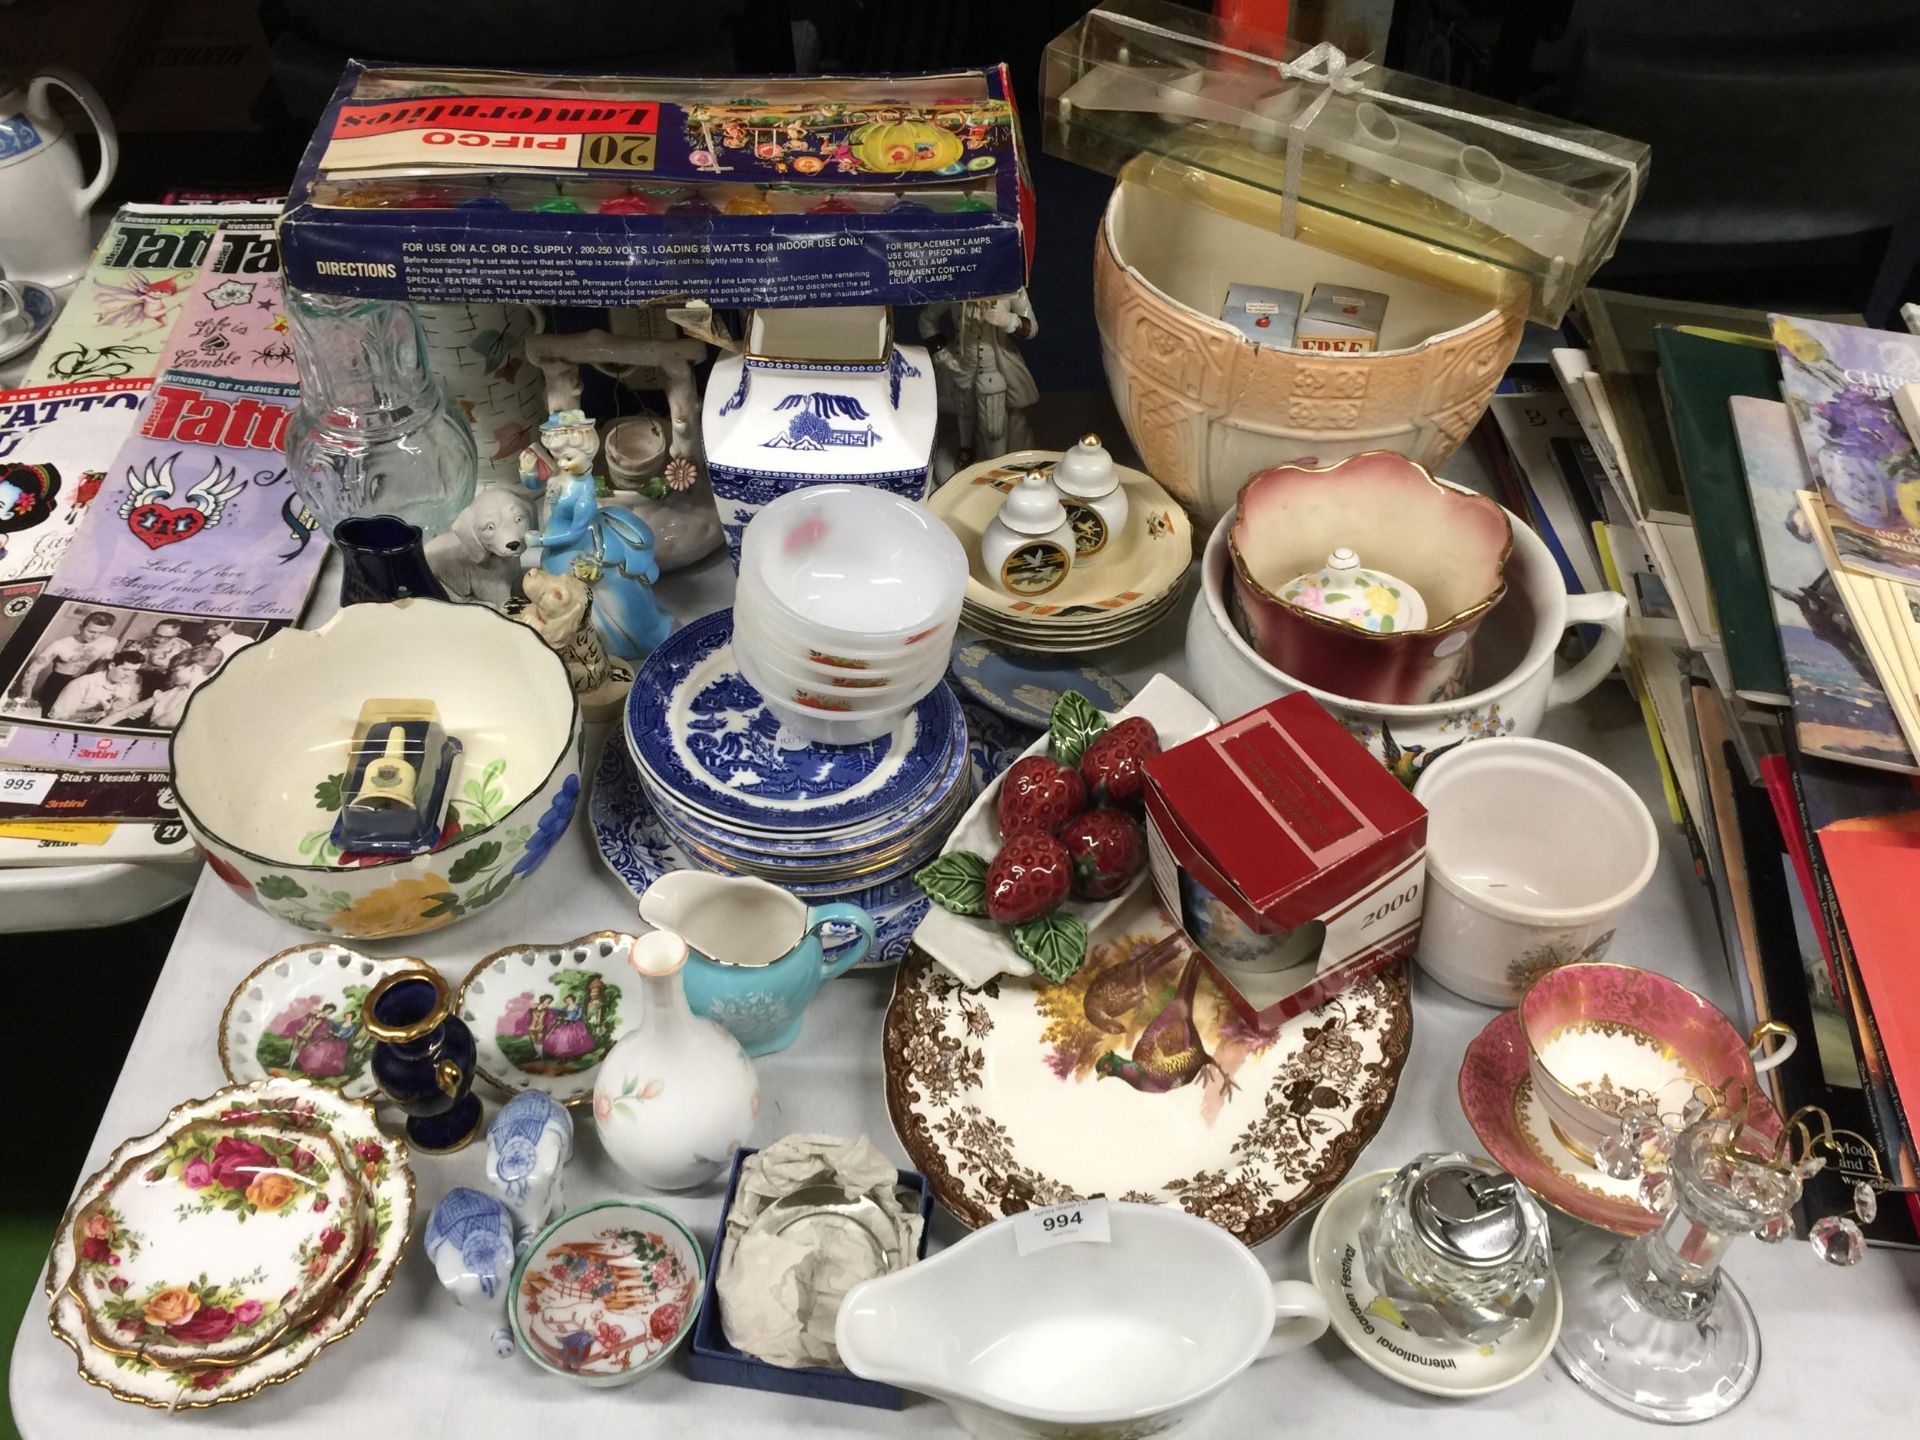 A VERY LARGE MIXED LOT TO INCLUDE PLATES, PLANTERS, VASES, GLASSWARE, VINTAGE CHRISTMAS LIGHTS,